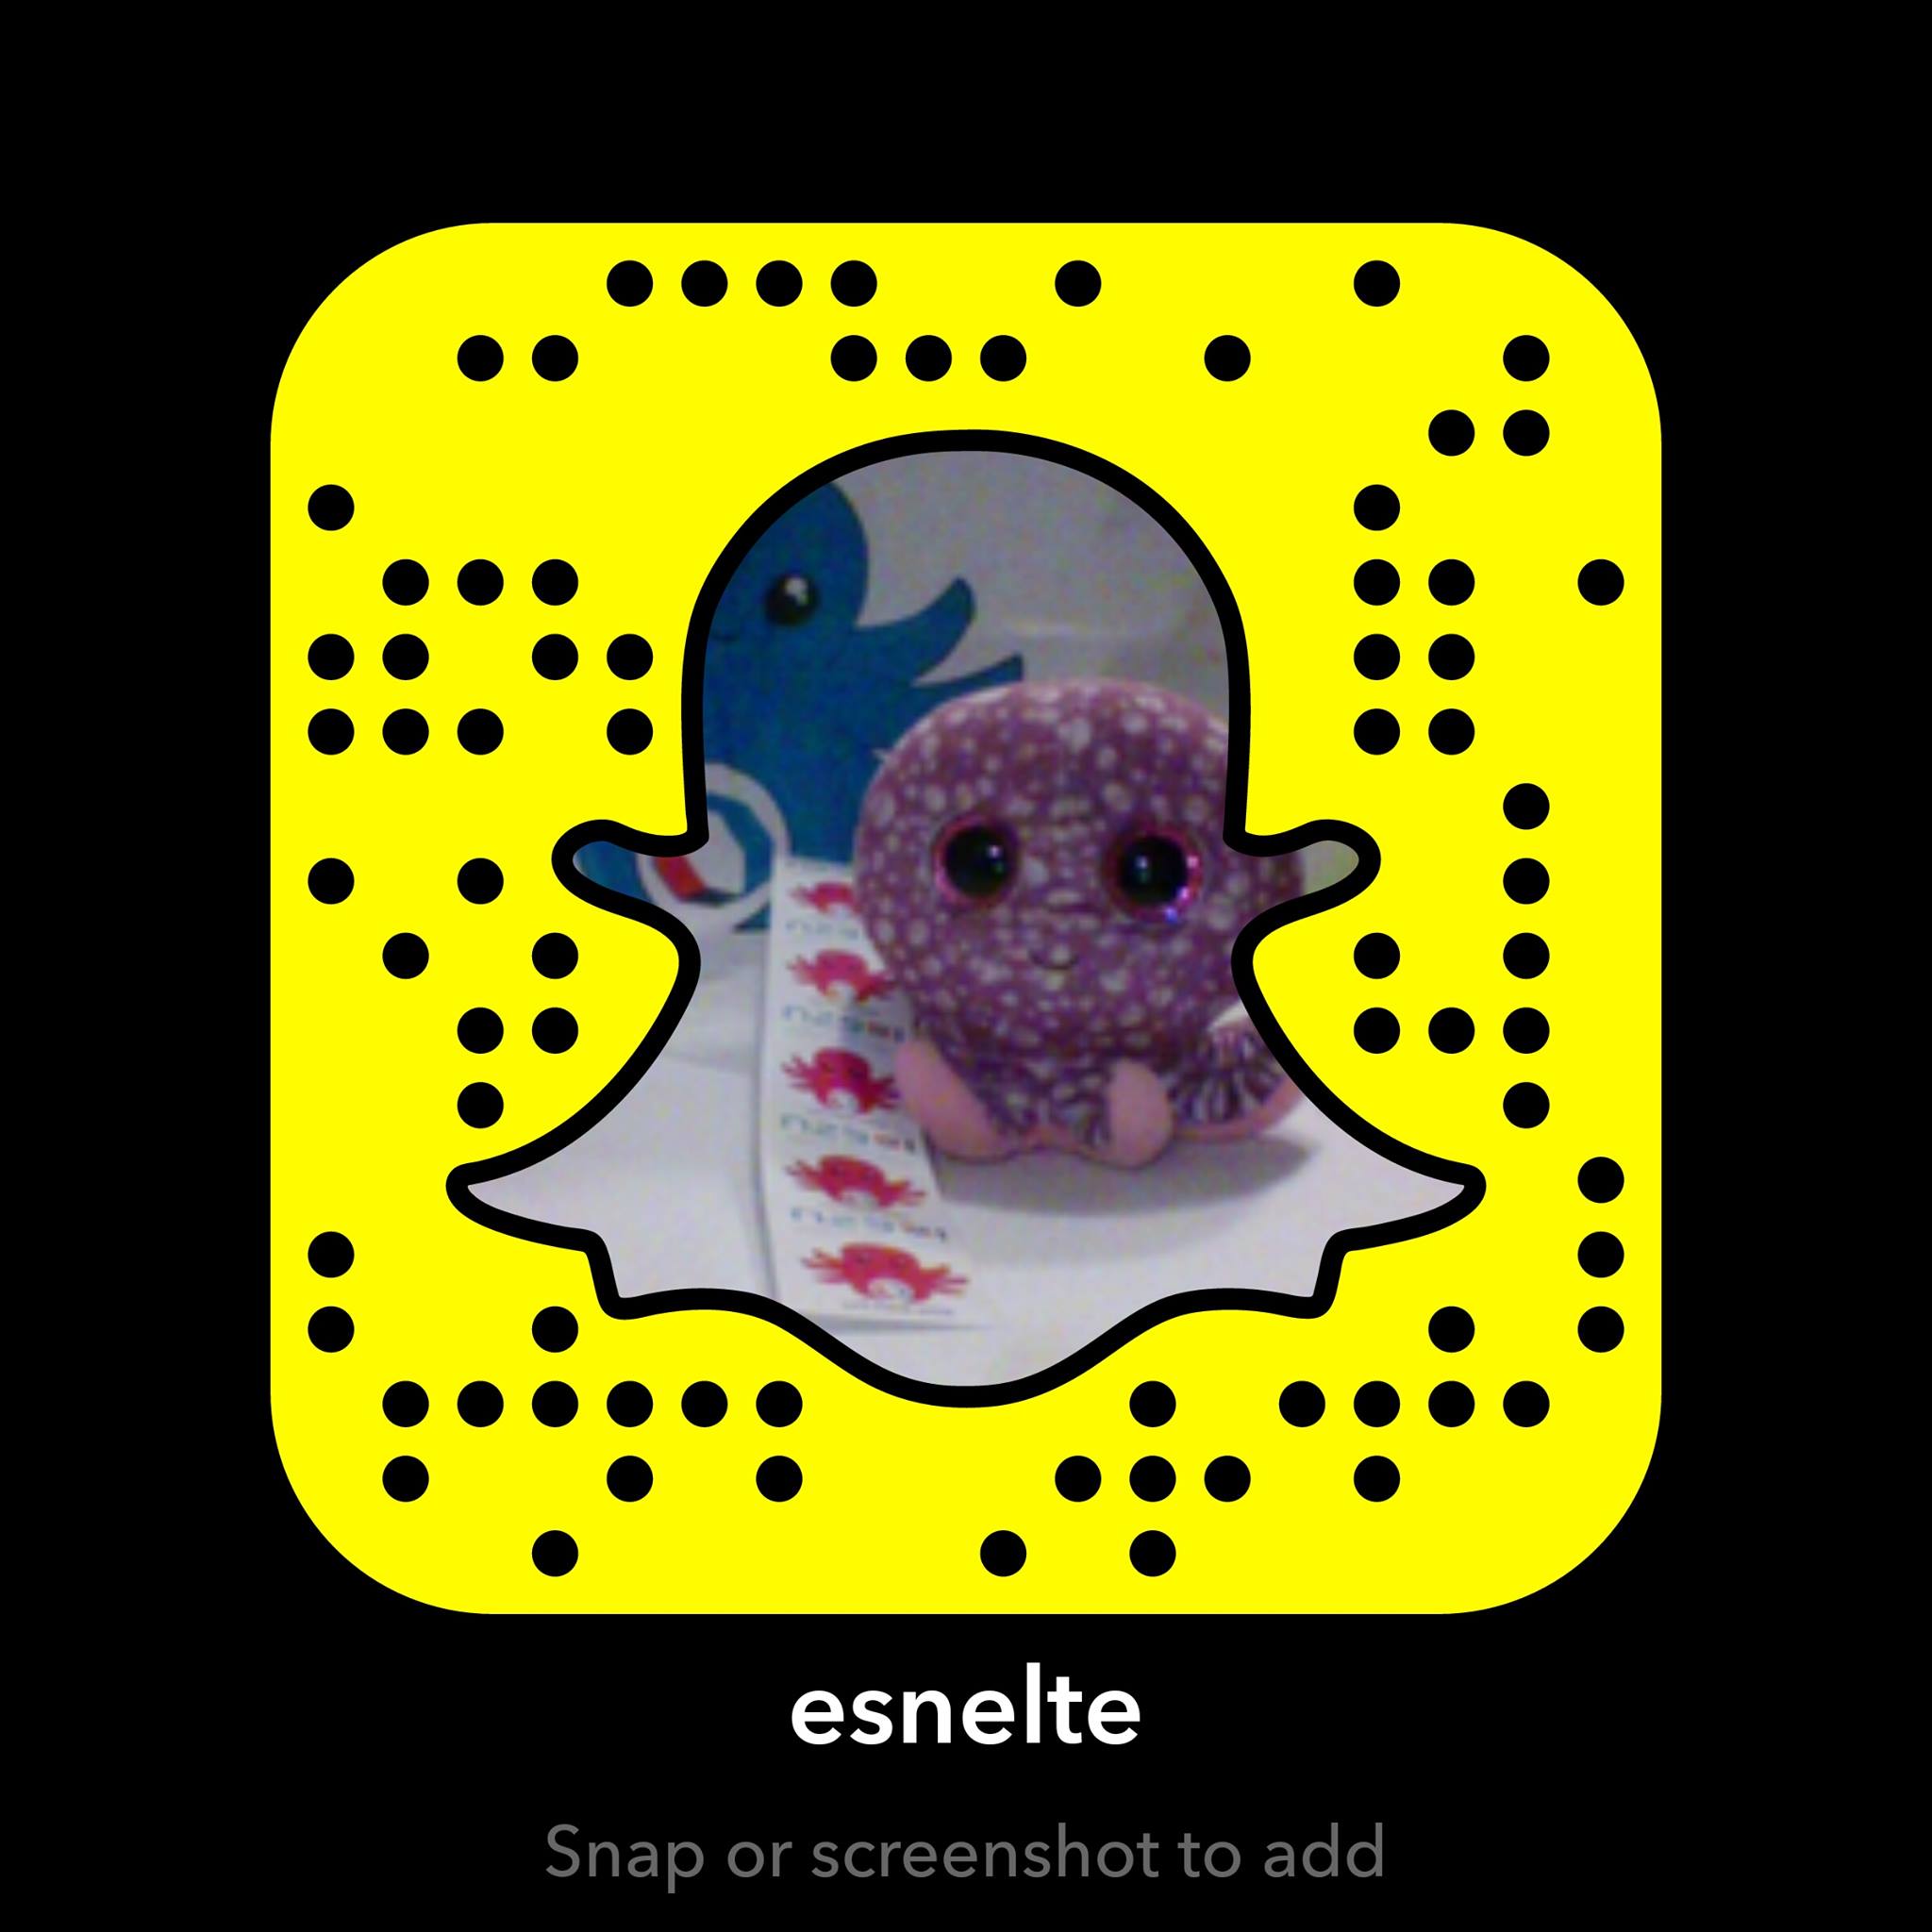 Snap or screenshot to add ESN ELTE on Snapchat